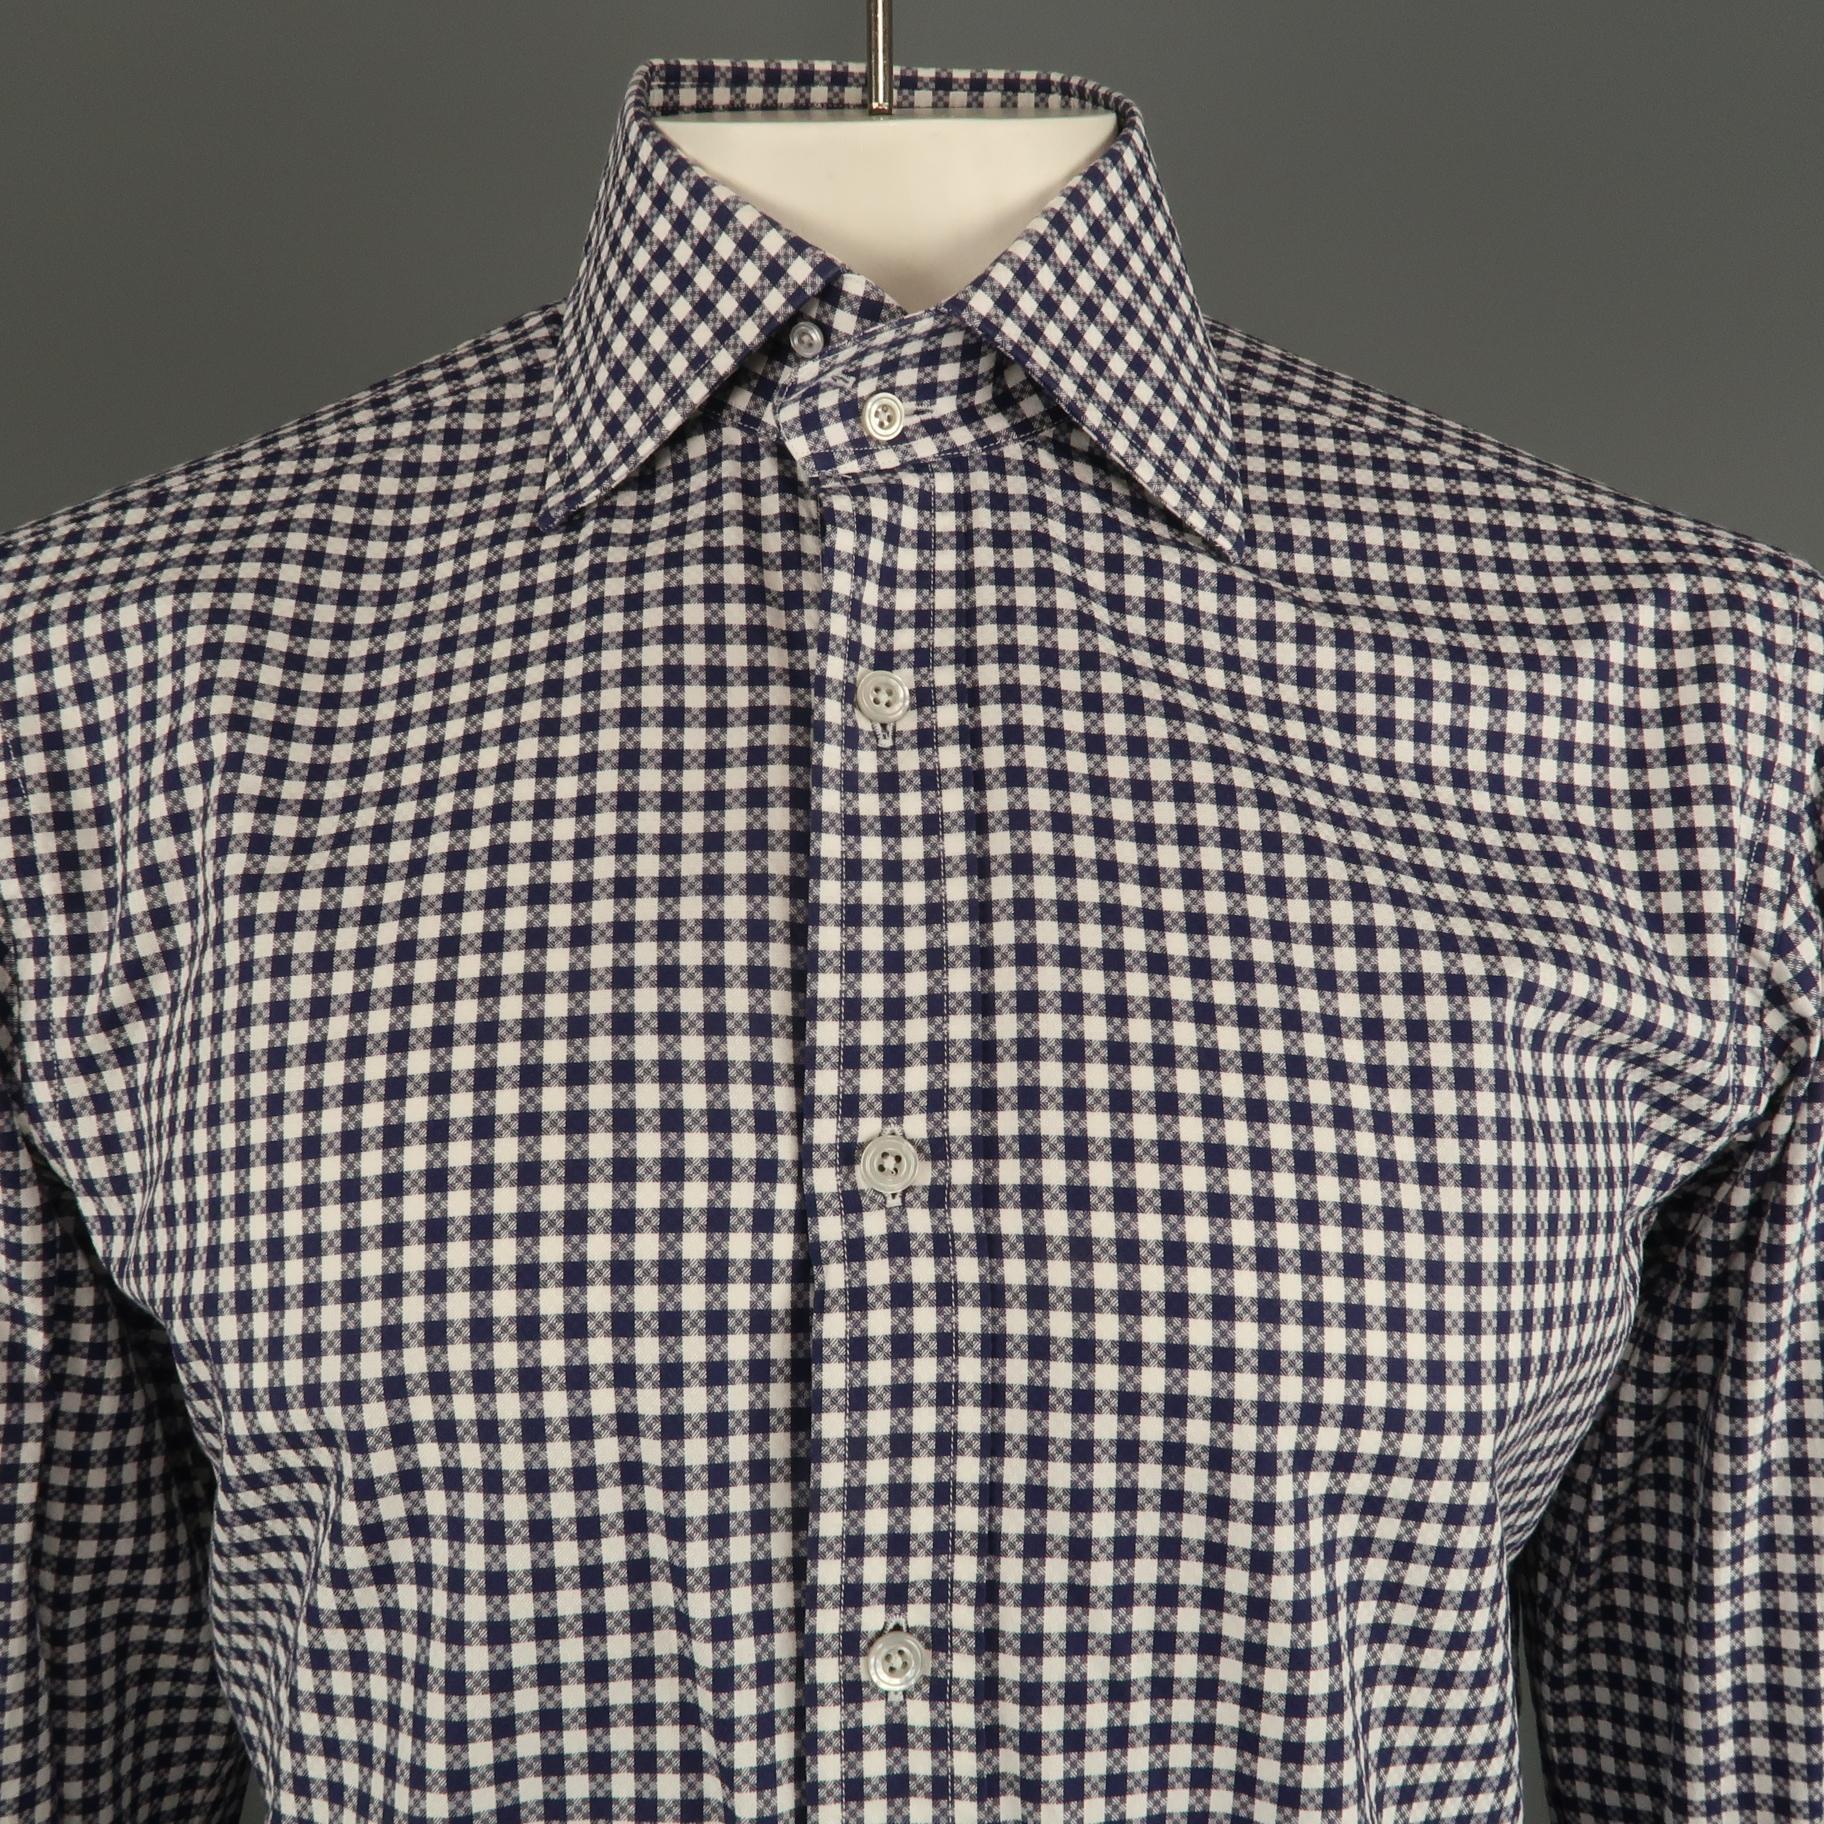 TOM FORD long sleeve shirt comes in a navy and white plaid cotton featuring a button up style and a pointed collar. Made in Italy.
 
Excellent Pre-Owned Condition.
Marked: 42
 
Measurements:
 
Shoulder: 19.5 in.
Chest: 46 in.
Sleeve: 27.5